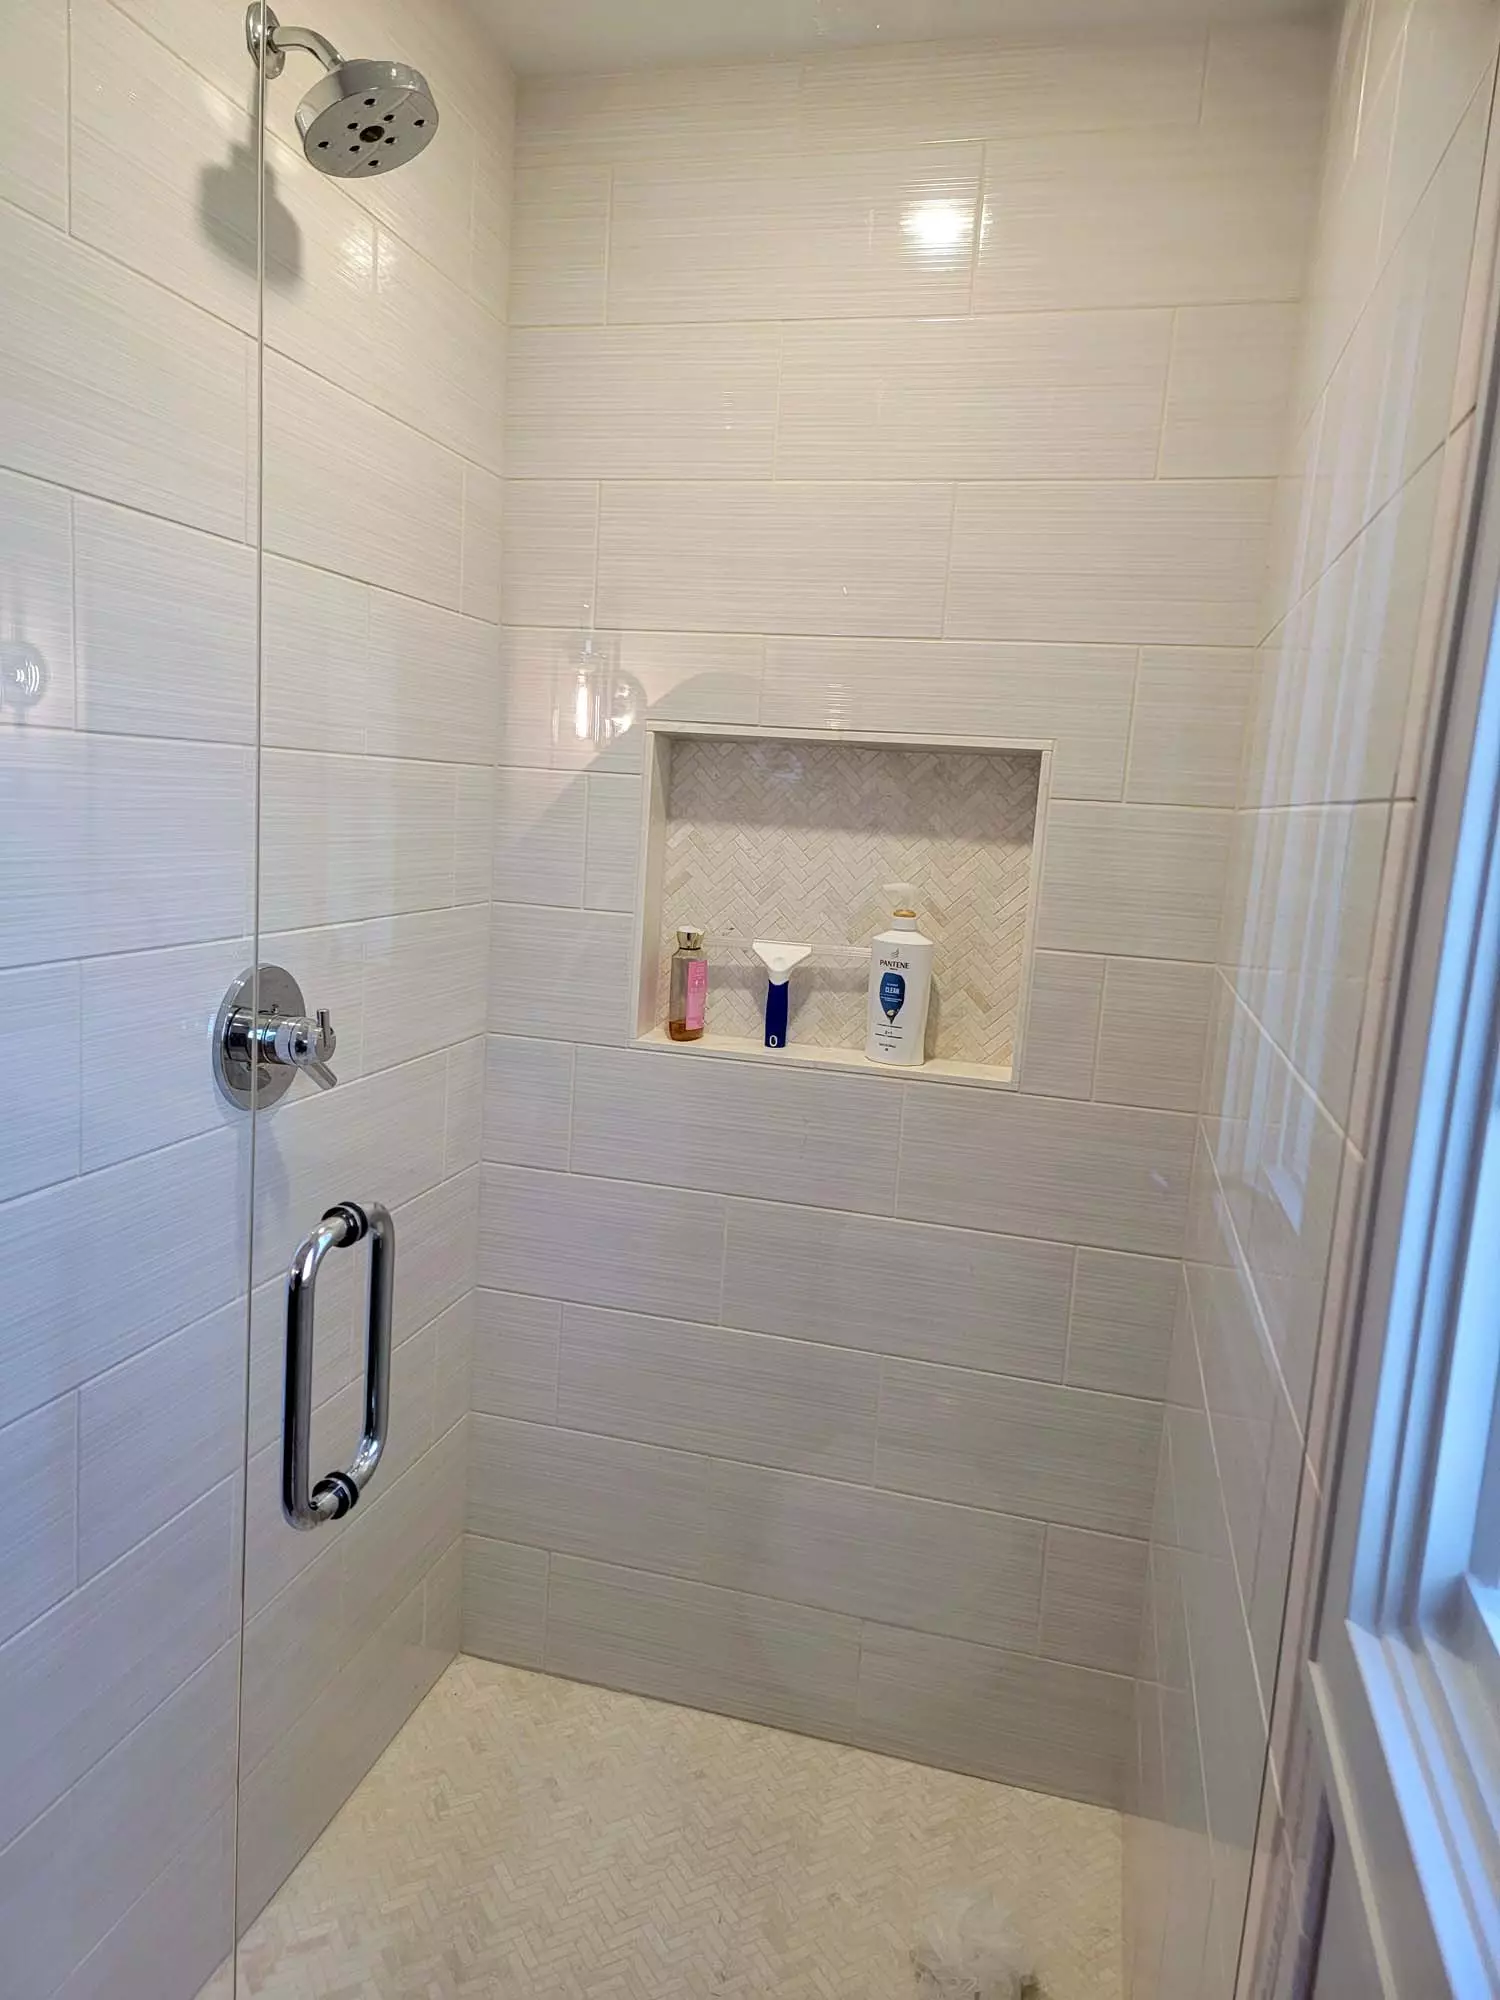 Tile shower with built-in niche